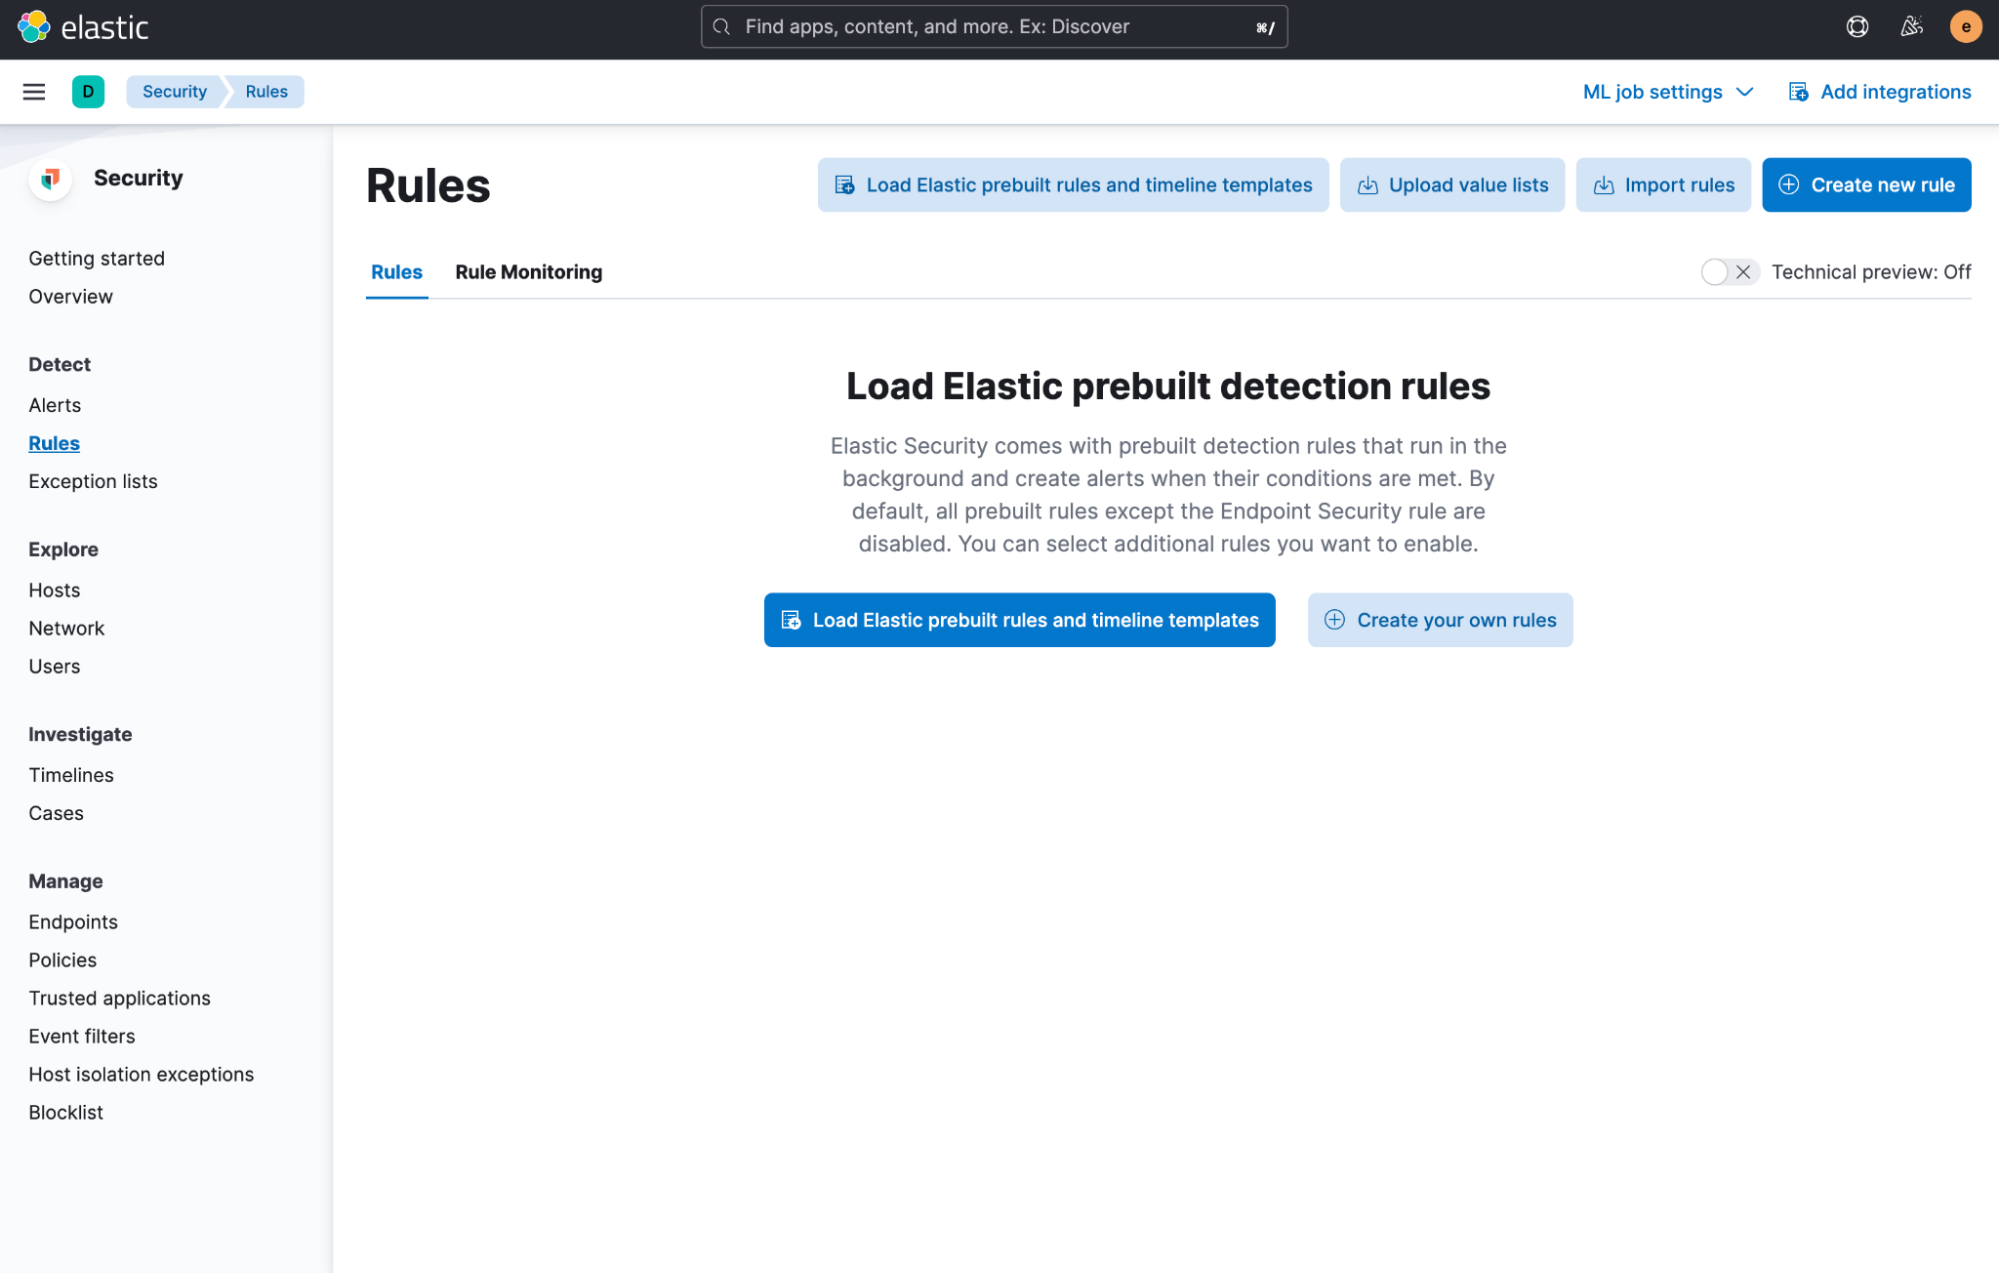 In order to enable and use the installed rules, you can navigate to Security > Rules and select `Load Elastic prebuild rules and timeline templates`.